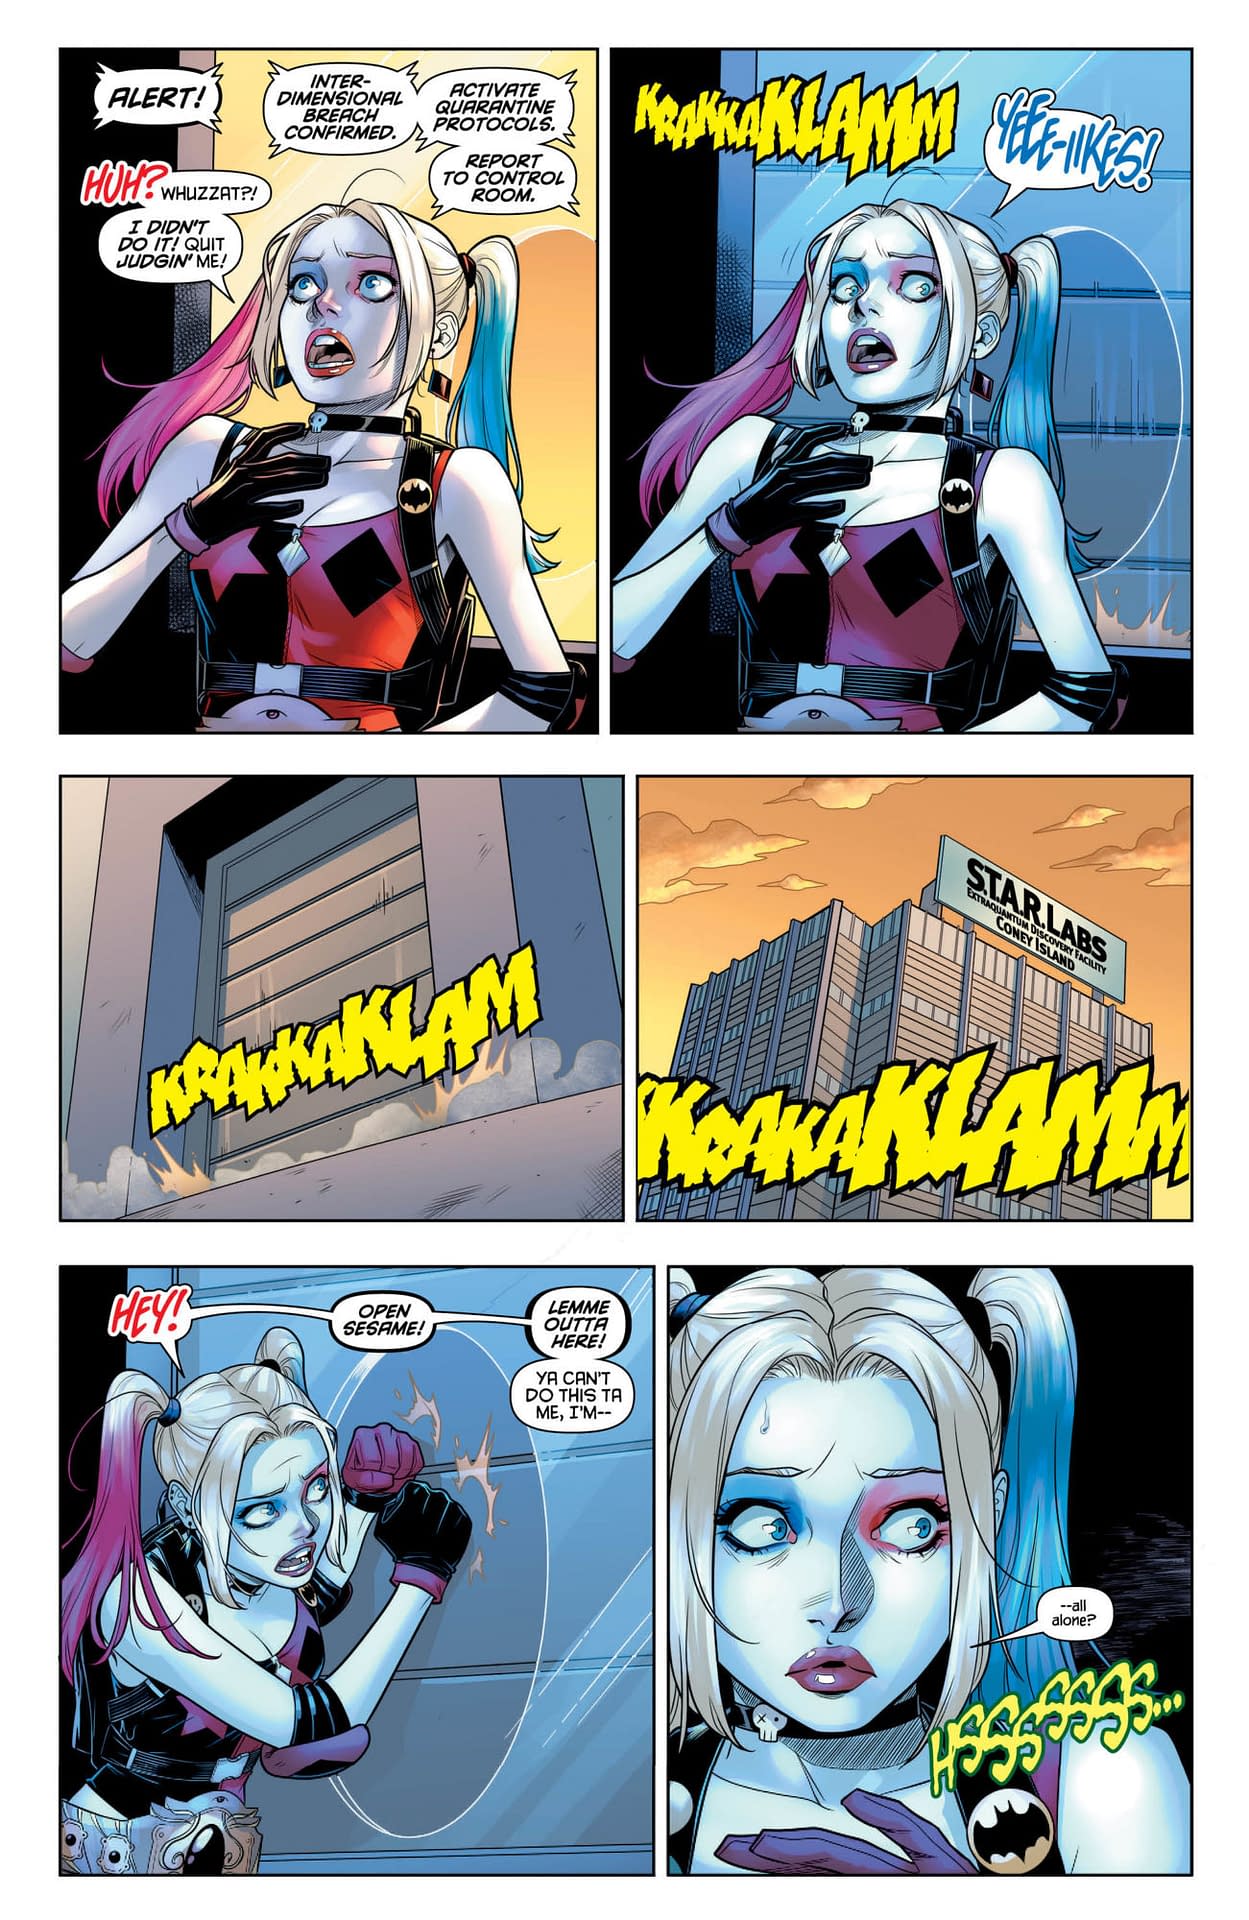 Can Harley Find a Cure for Cancer in Tomorrow's Harley Quinn #60?